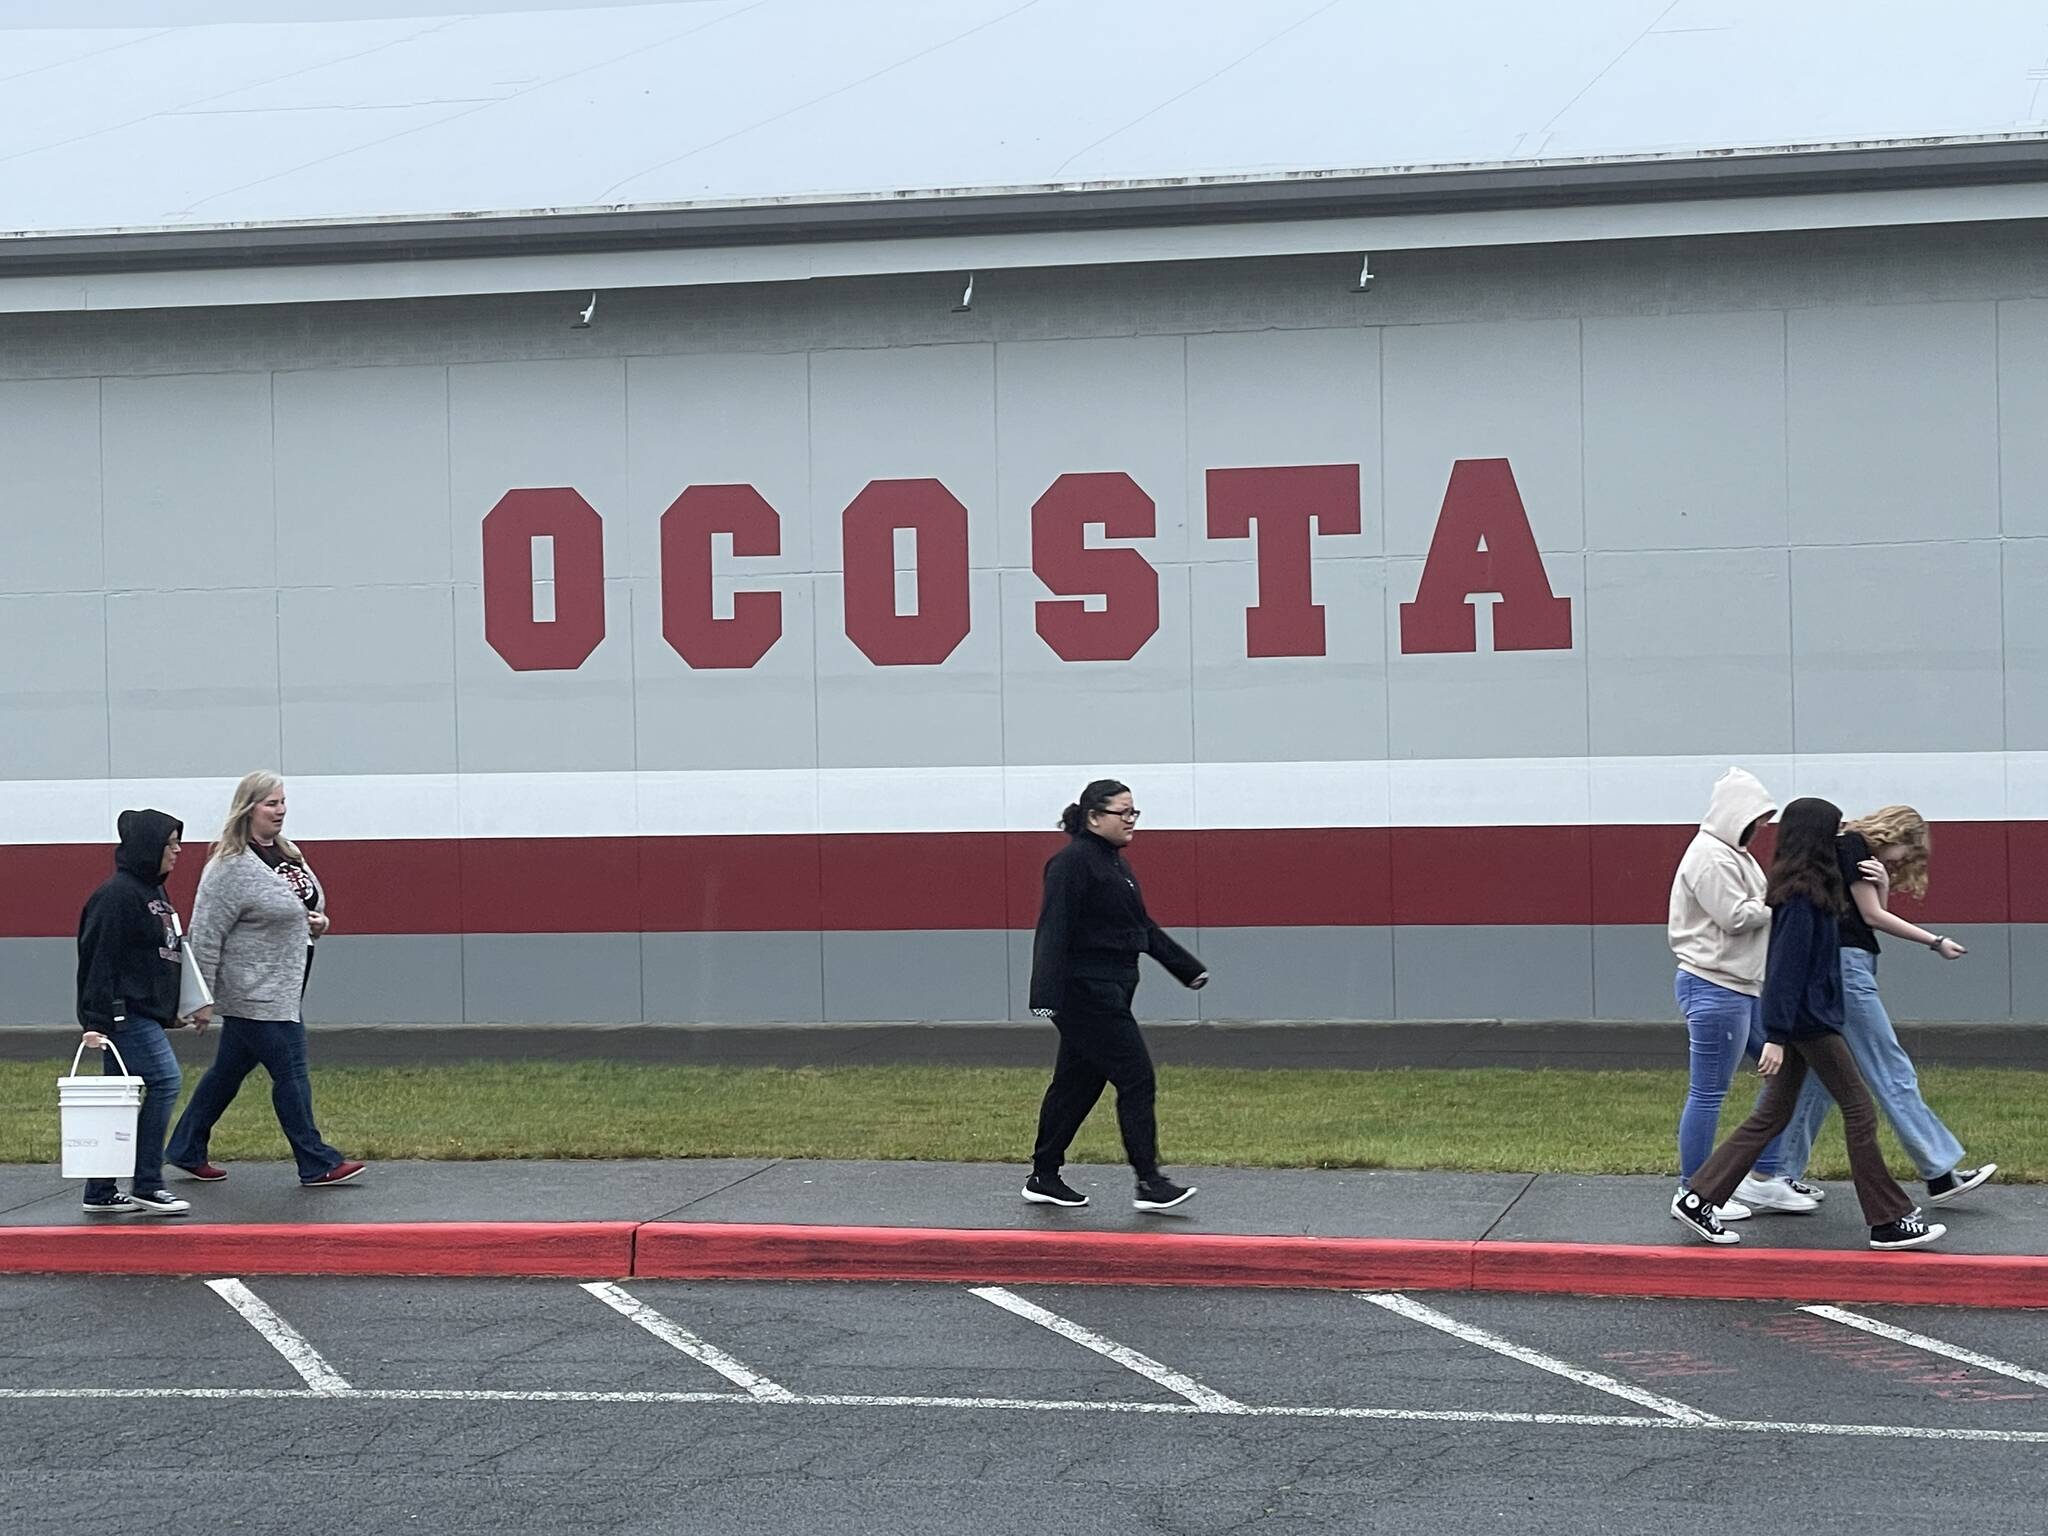 A civil suit was filed against the Ocosta School District for its role in enabling the alleged offenses committed by a teacher against students. (Michael S. Lockett / The Daily World File)